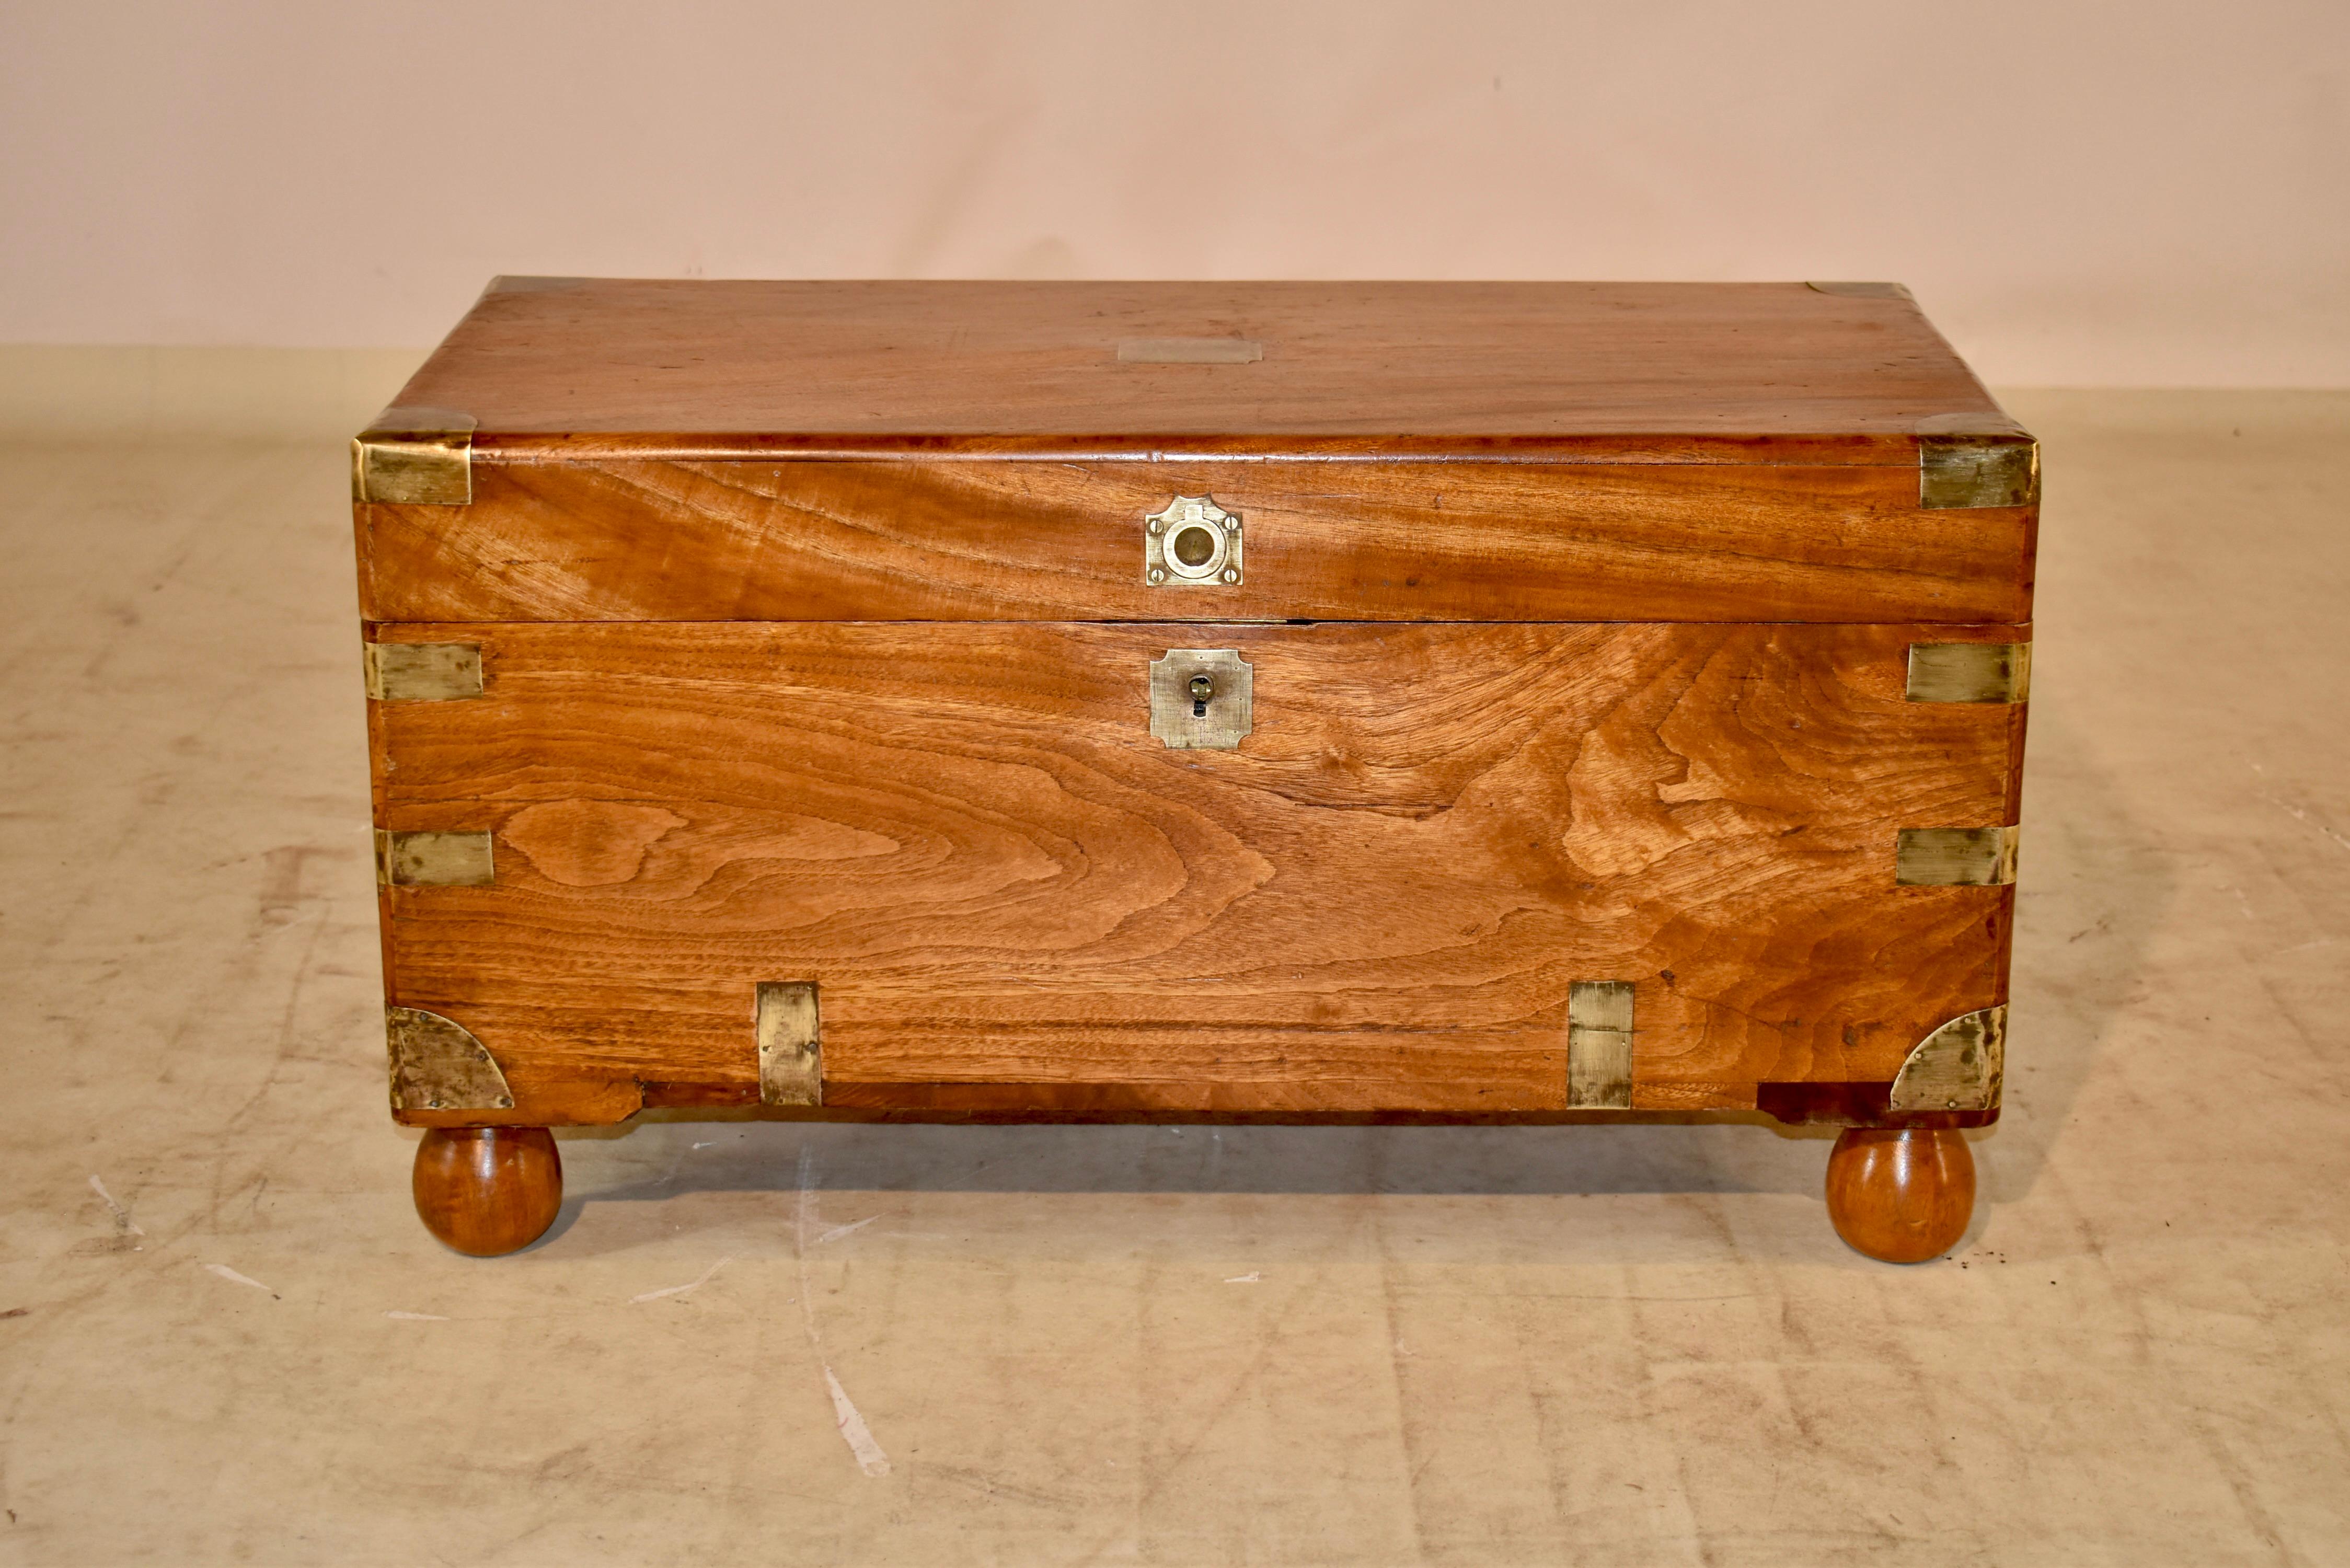 19th century British military campaign chest made from camphor wood. It retains the original brass hardware. These wooden chests were originally made to carry the belongings of military officers during campaigns in a wide variety of climates, as